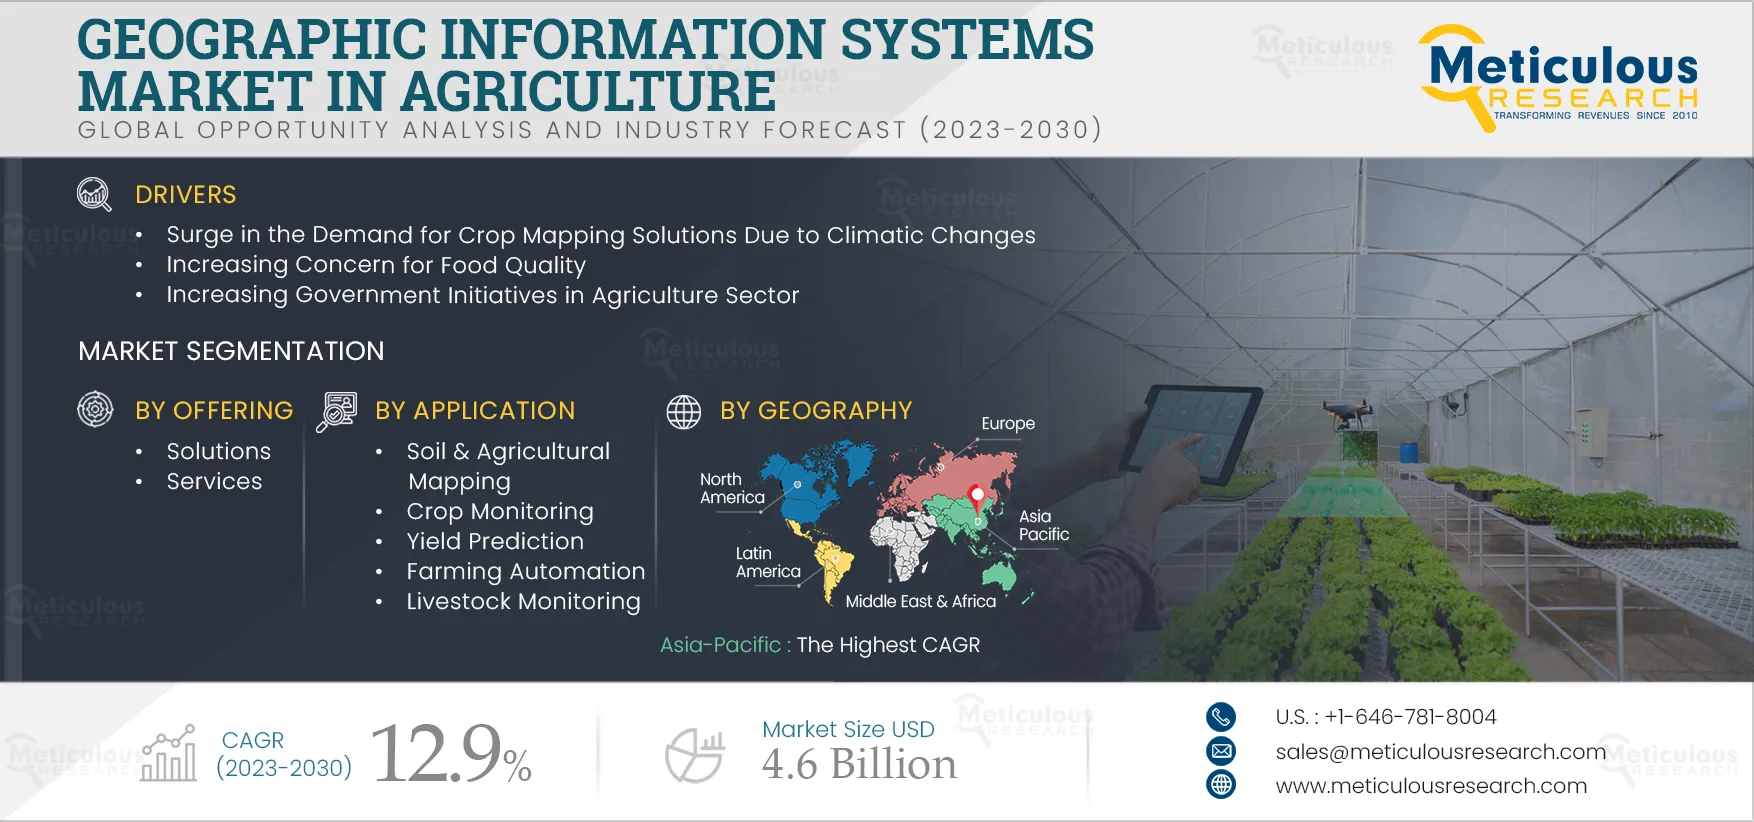 Geographic Information Systems Market in Agriculture